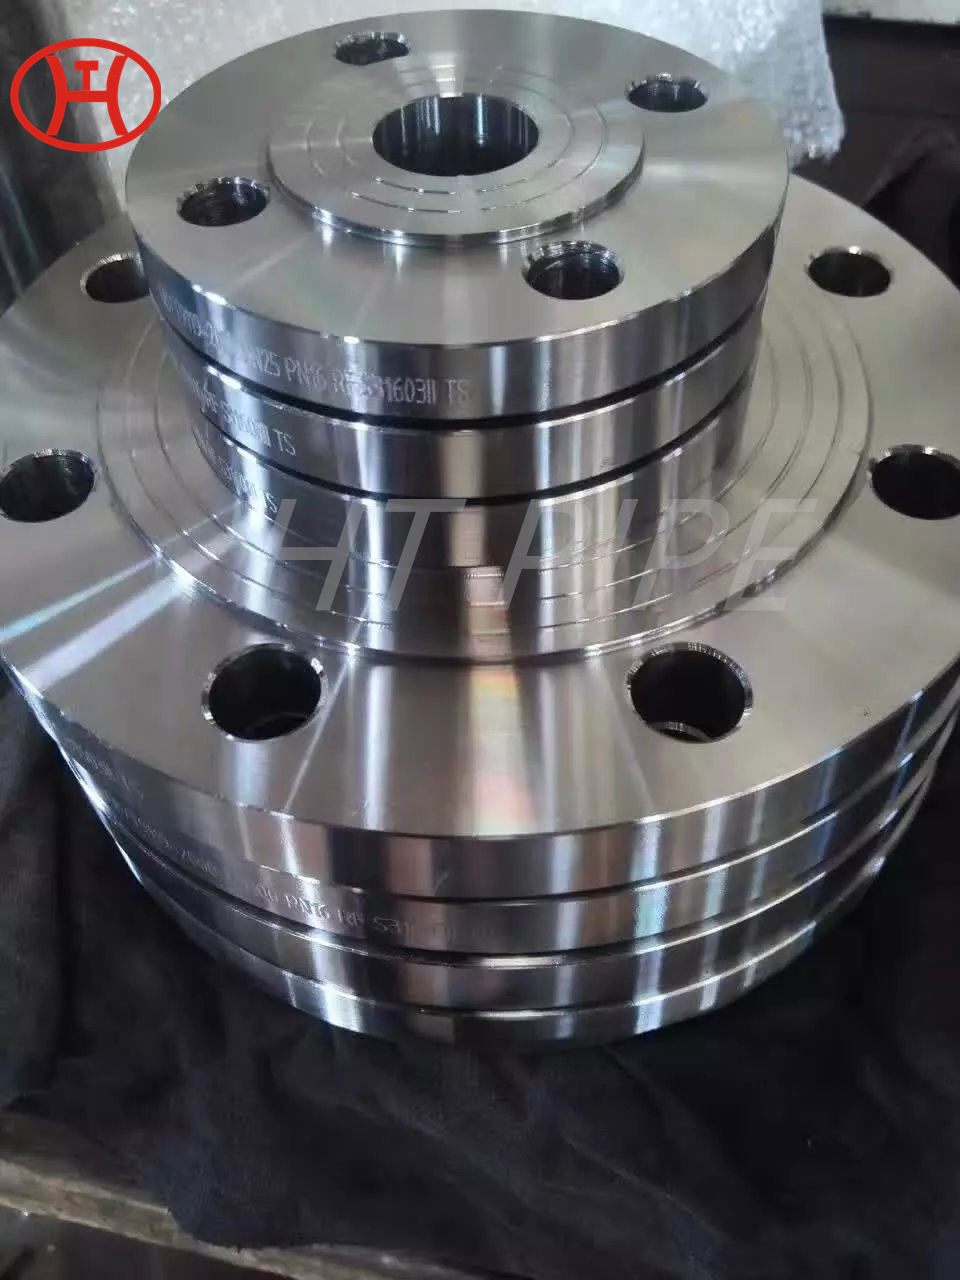 17-4ph stainless steel flange plate flange